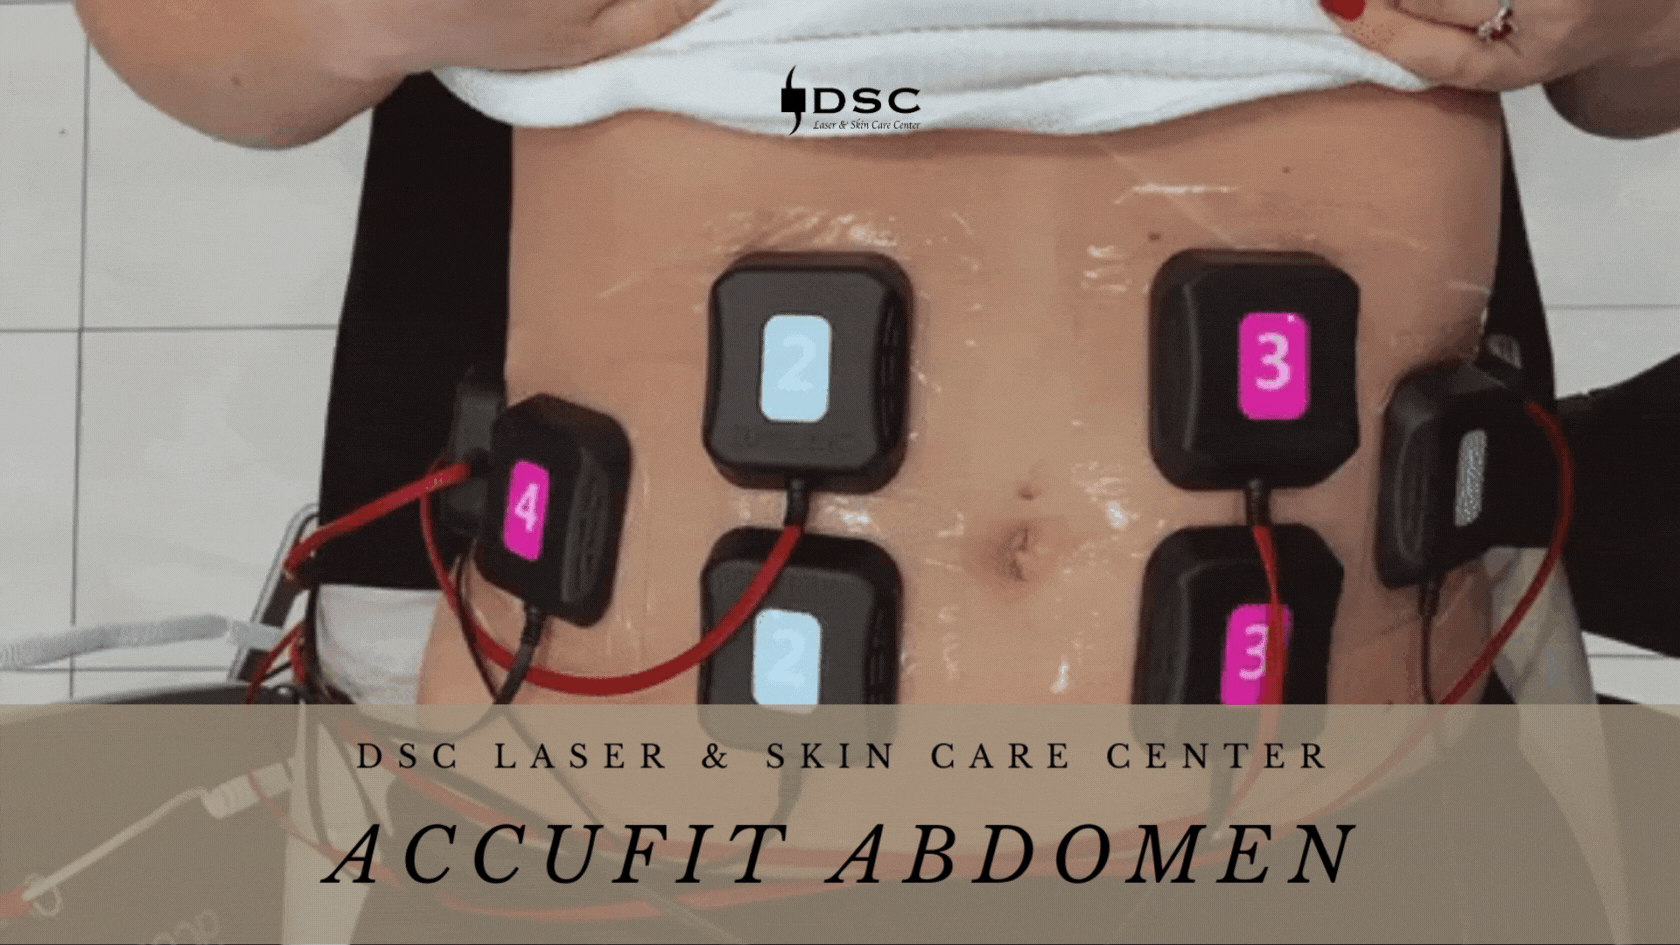 DSC Accufit treatment to the anterior abdomen showing gif of Accufit contacts attached to abdomen